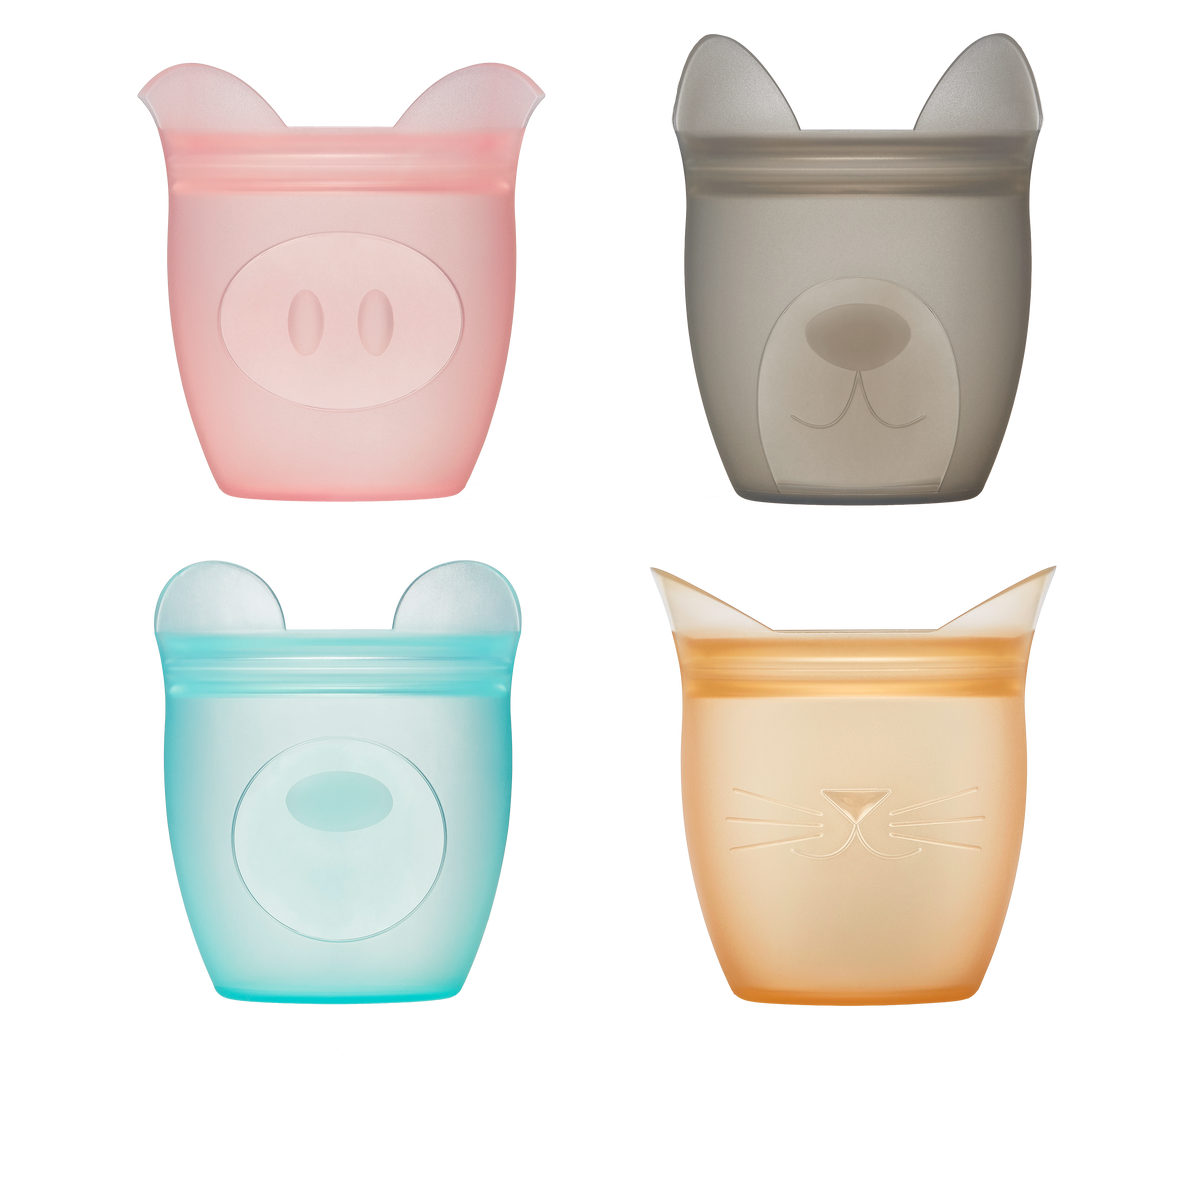  Snack Containers